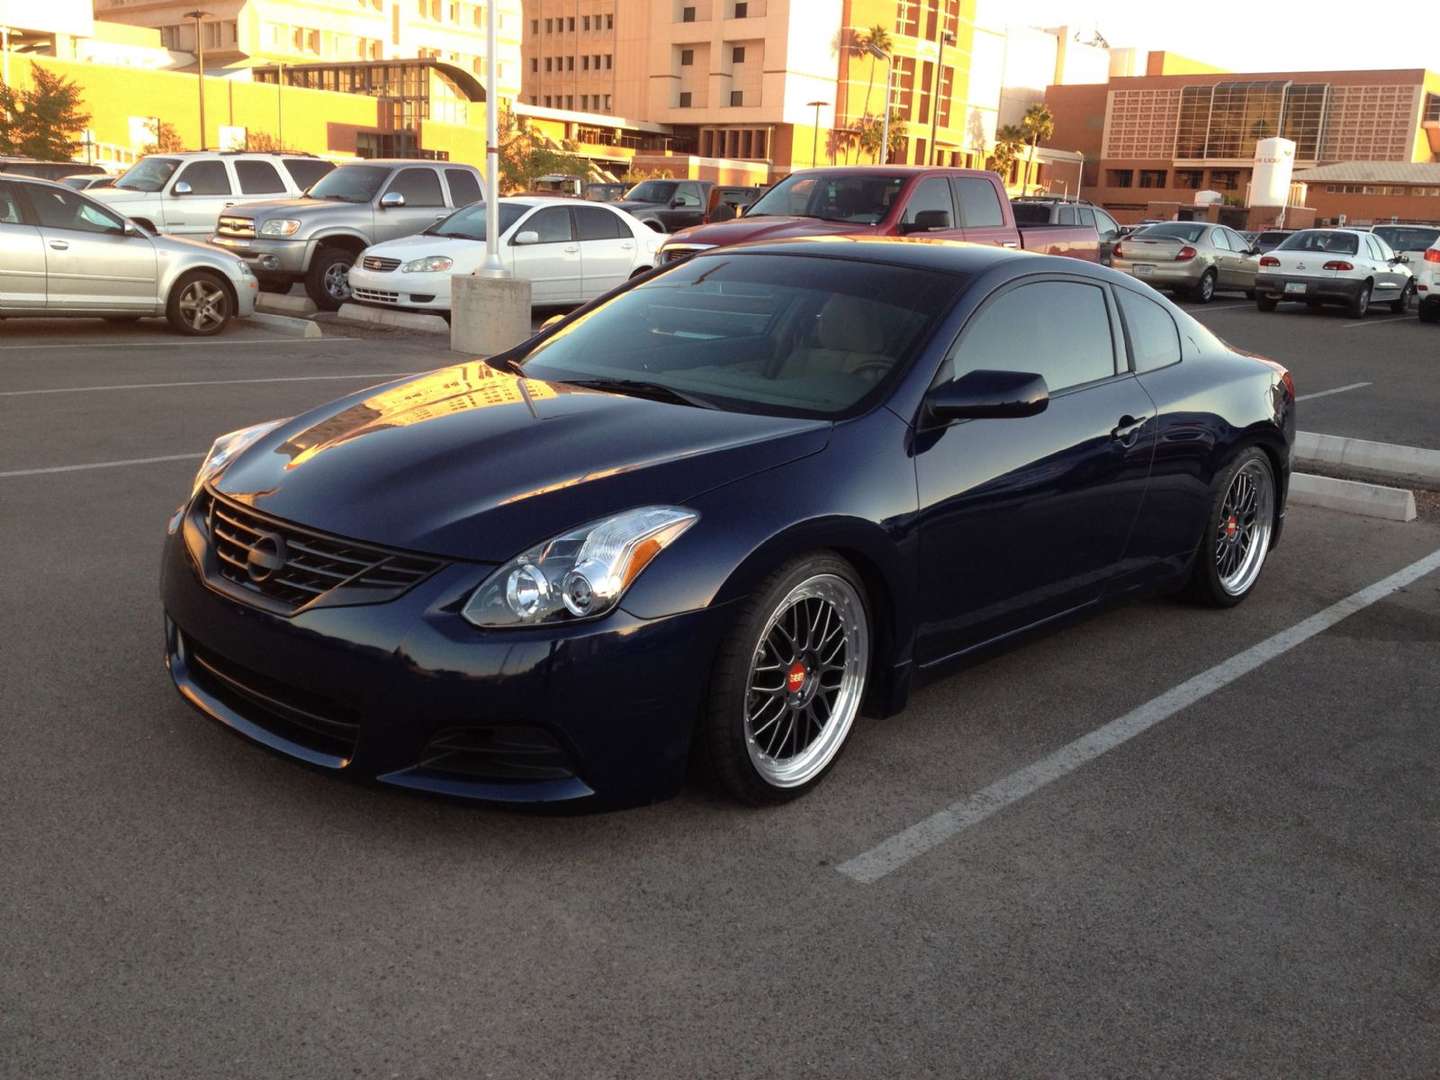 Nissan Altima Coupe #8525760